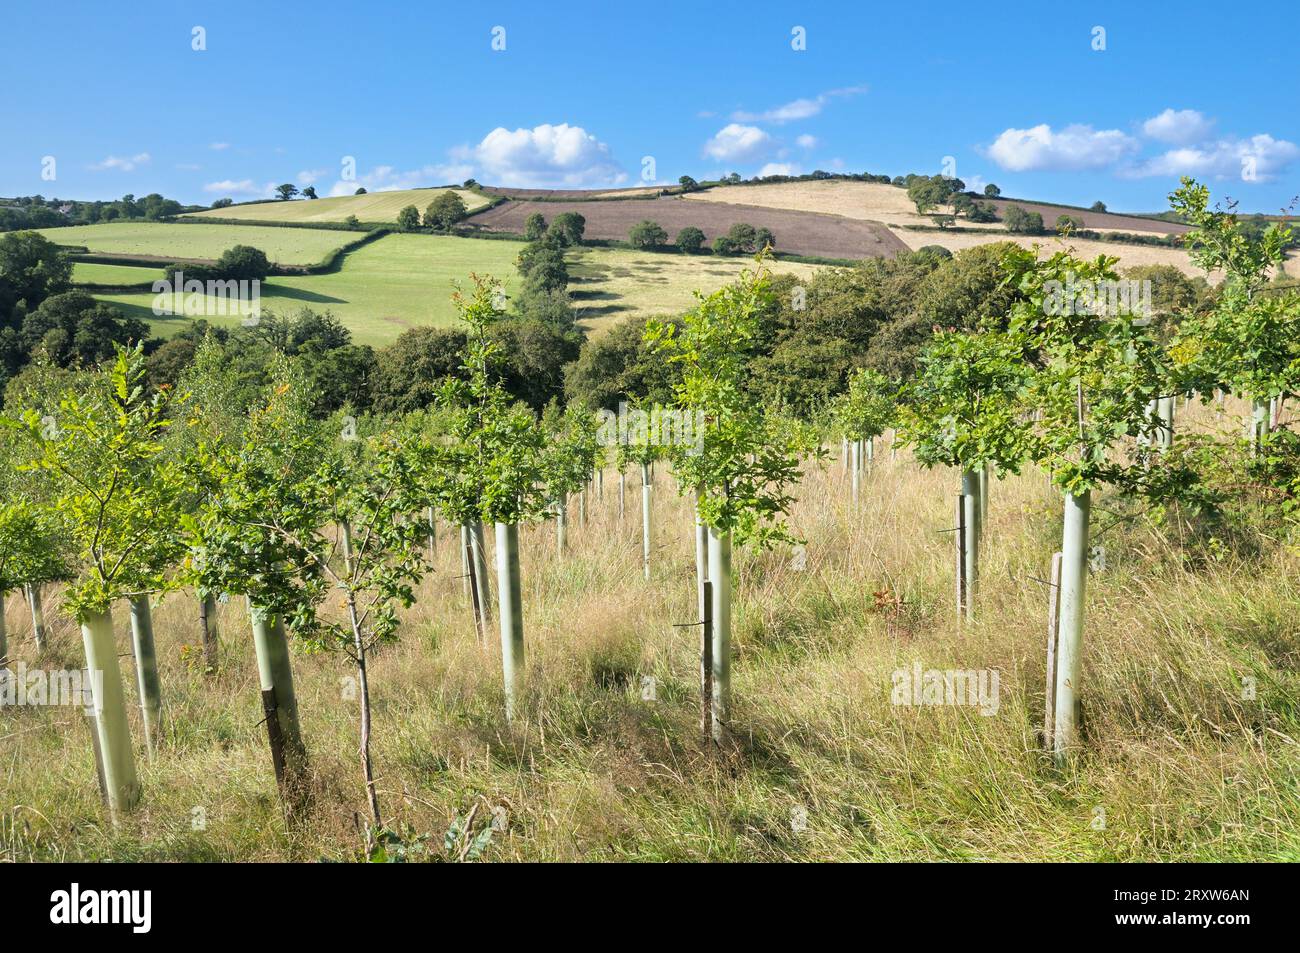 Growing young trees or tree saplings planted with protective tree shelter plastic guards or Tuley tubes in the English countryside. Devon, England, UK Stock Photo